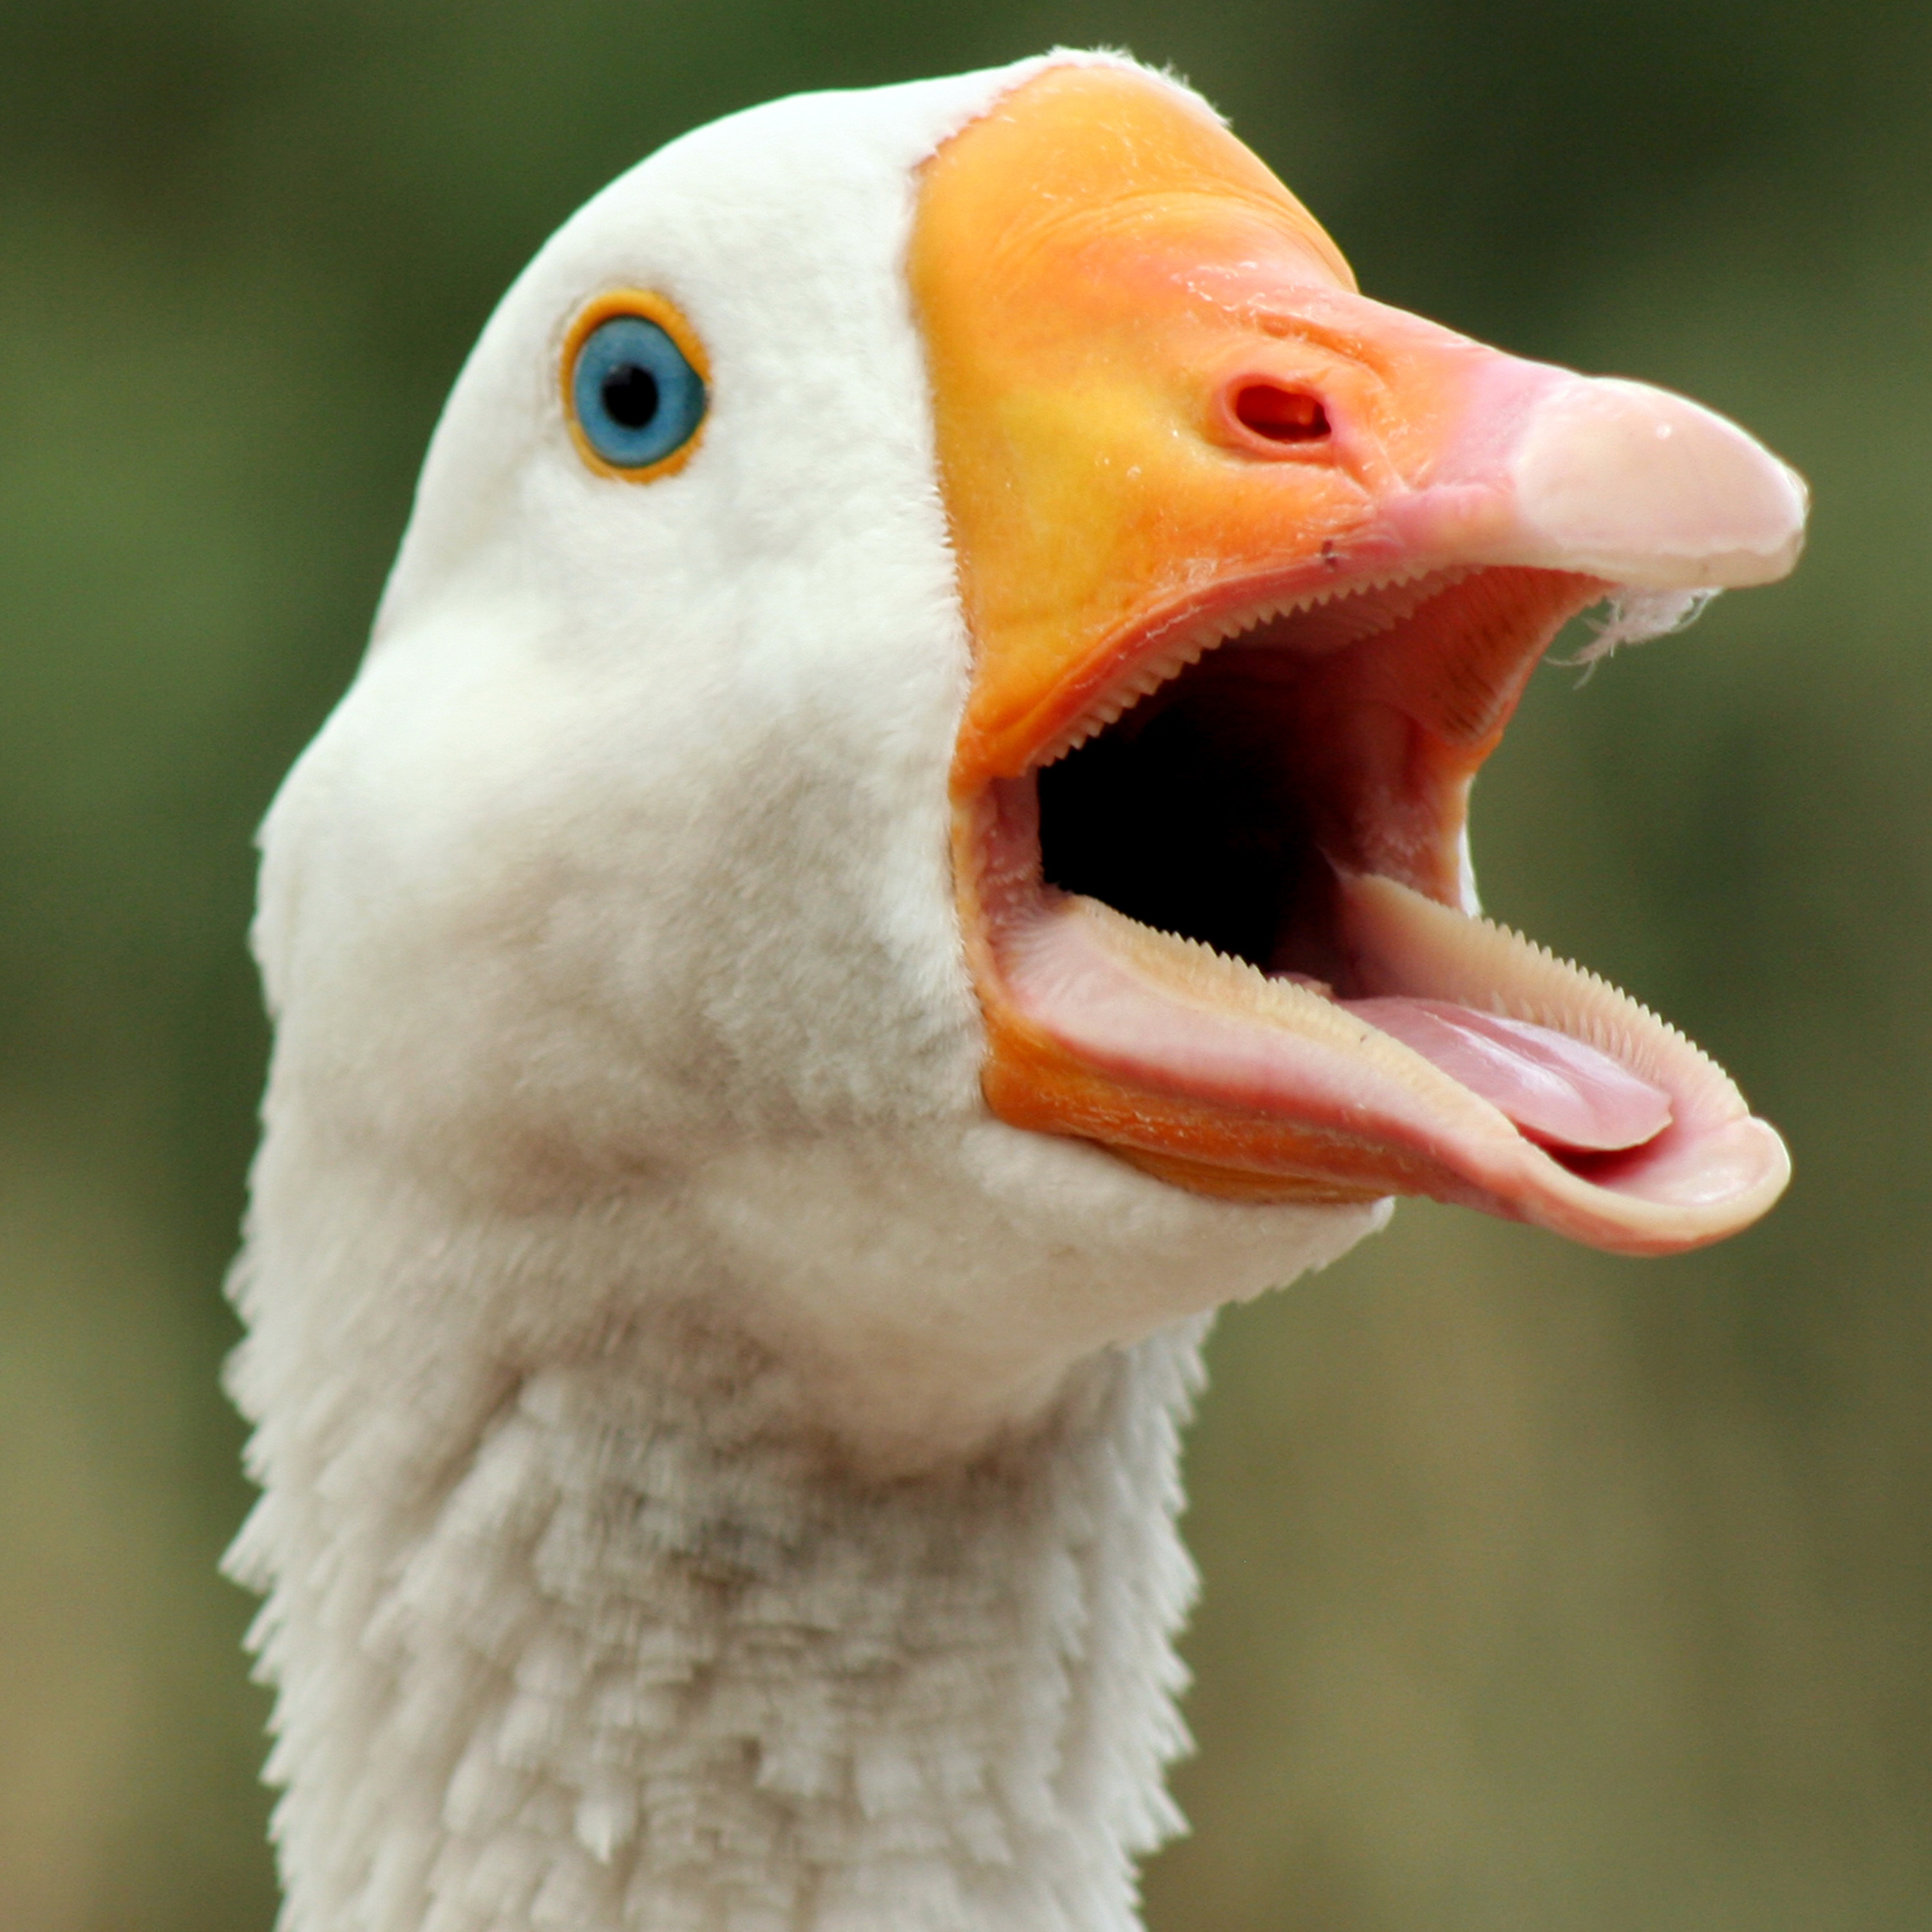 A close up of a white goose with its bill wide open, honking.